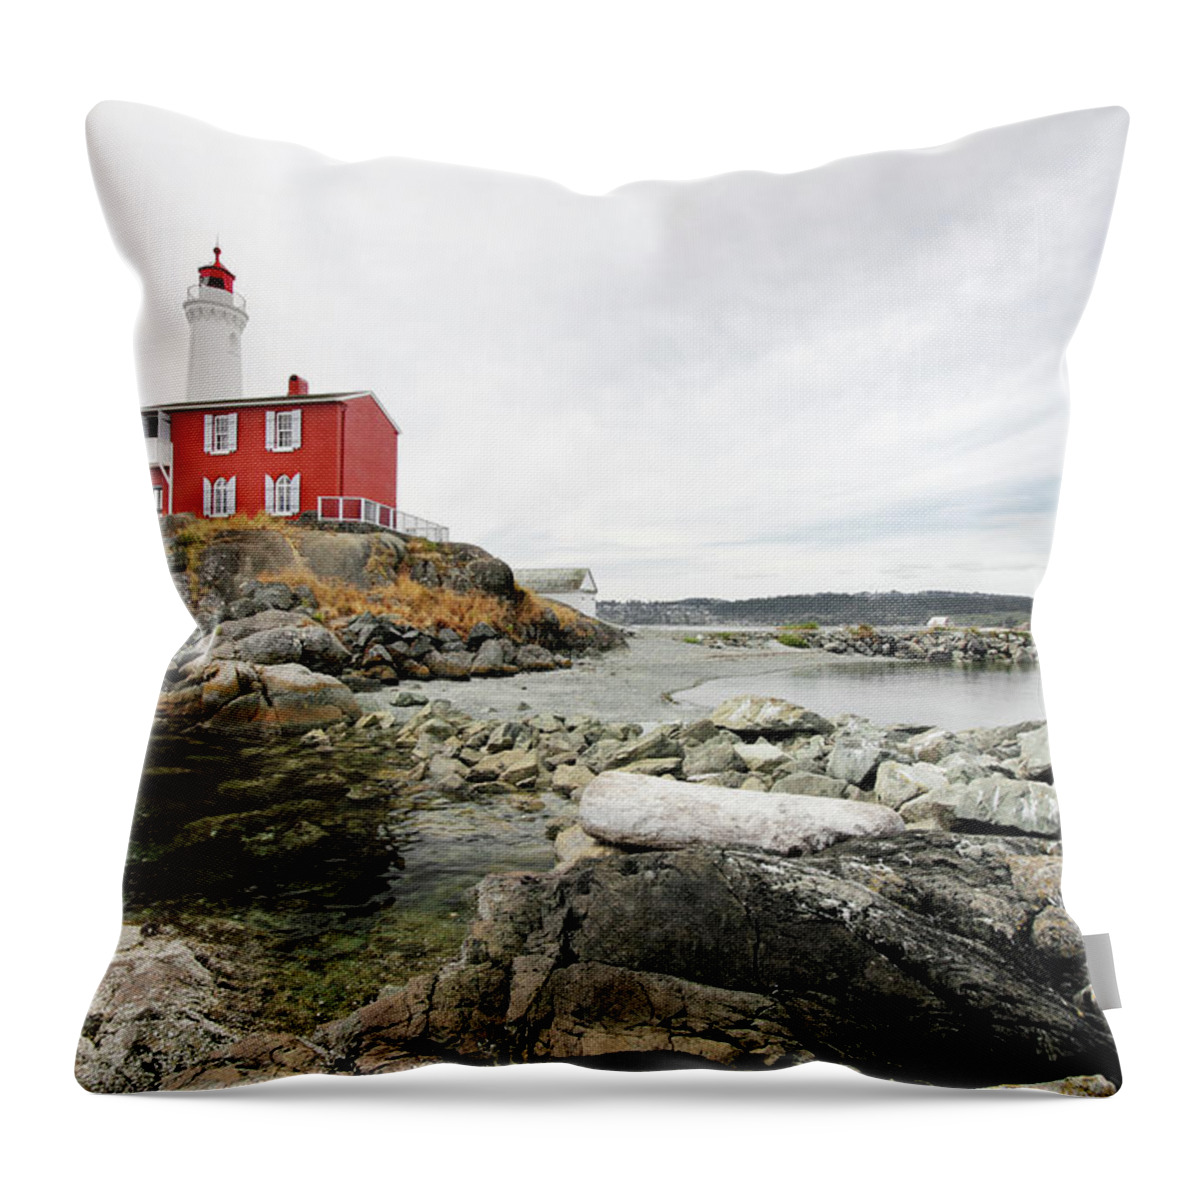 Water's Edge Throw Pillow featuring the photograph Fisgard Lighthouse by Emilynorton